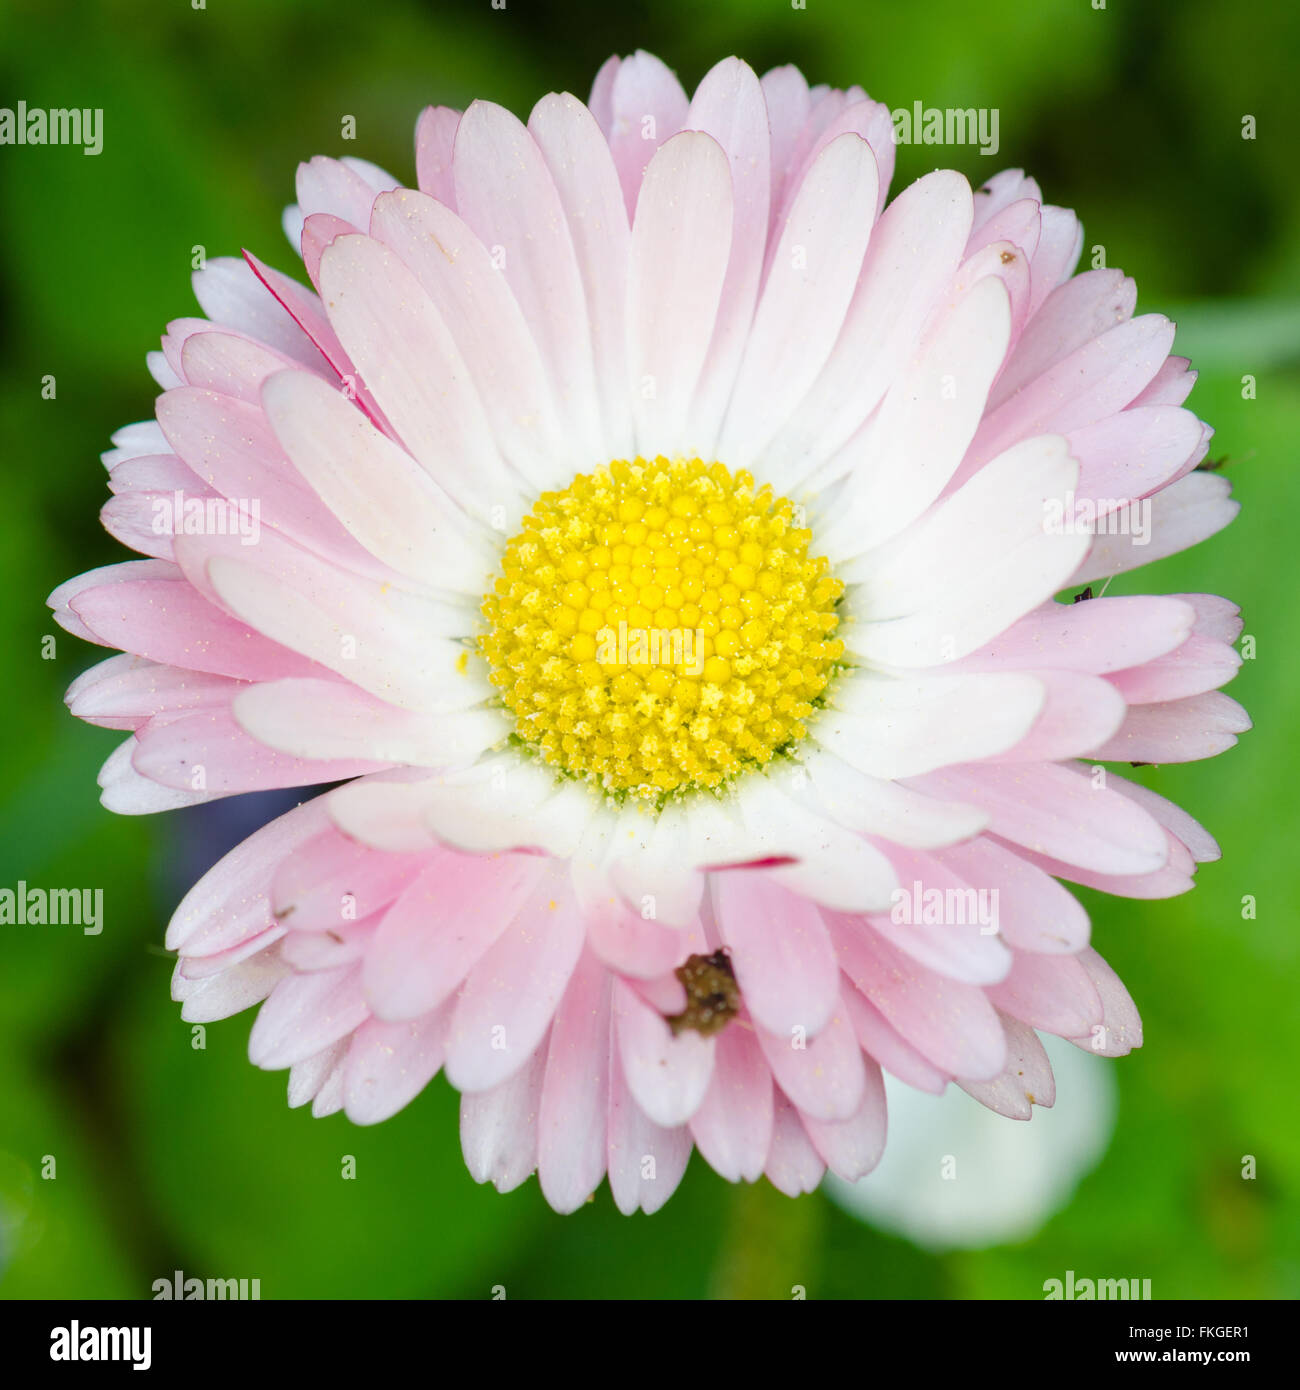 Flower of a daisy, close up Stock Photo